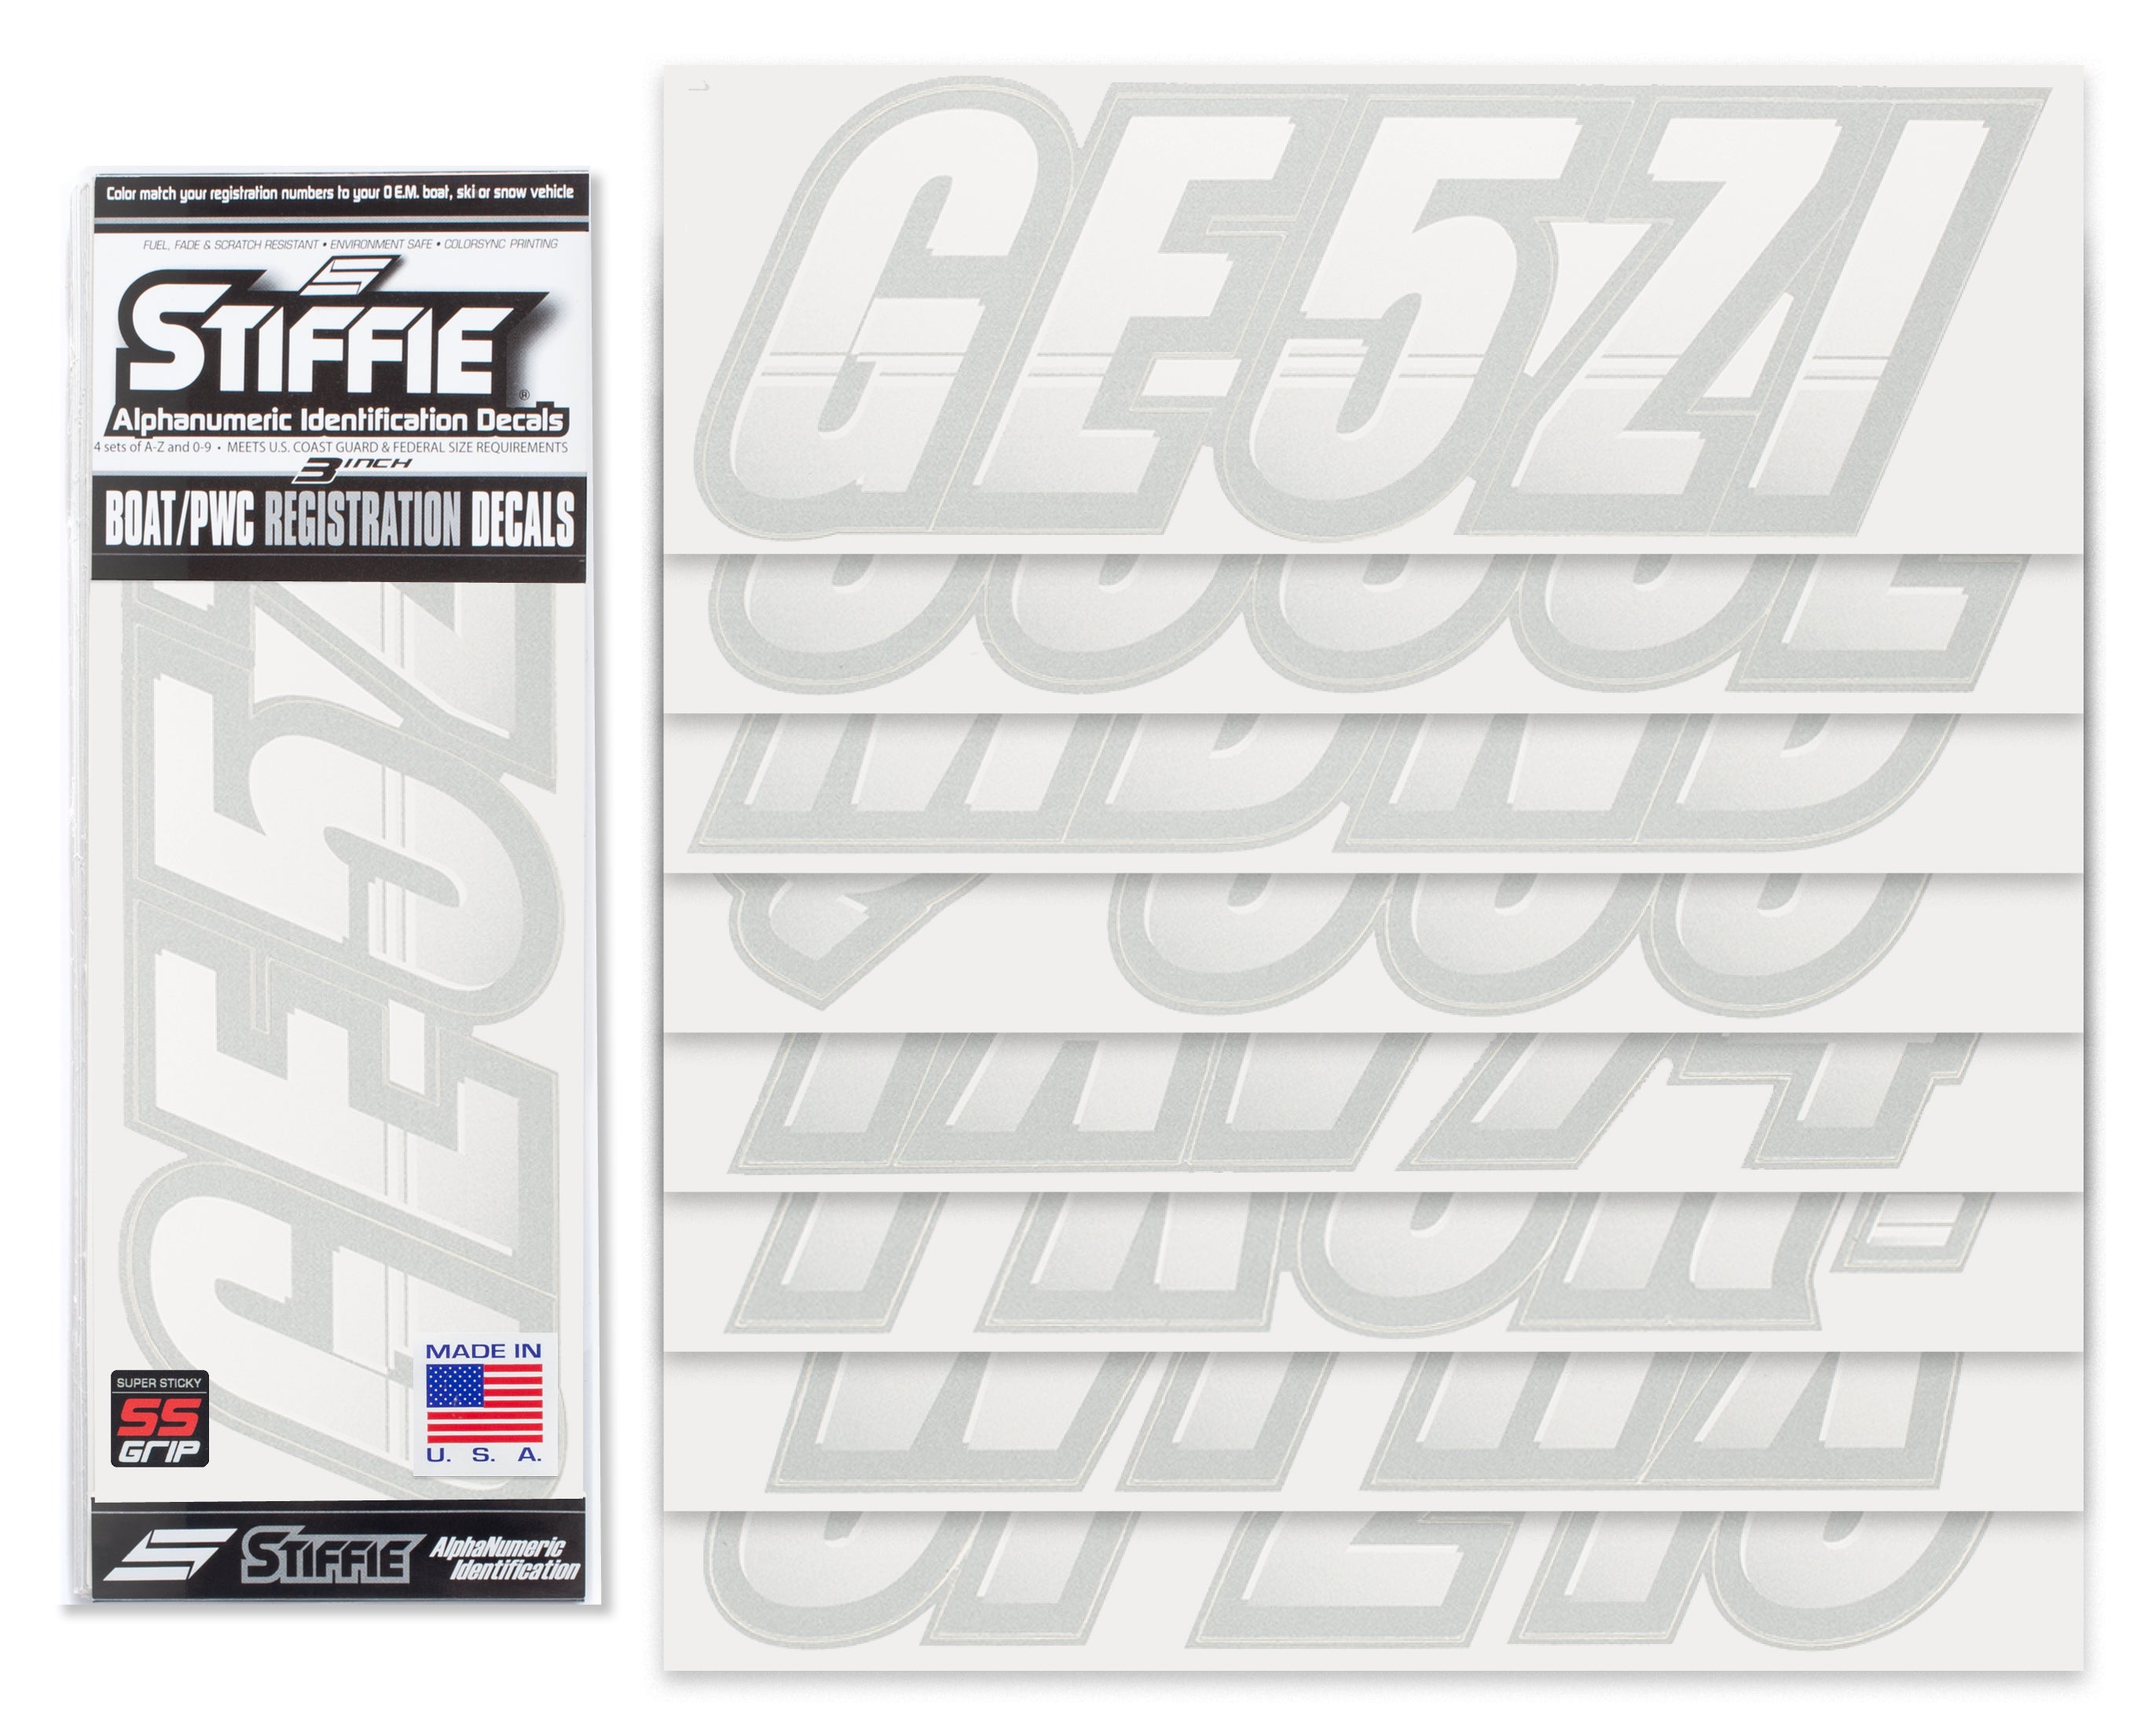 Stiffie Techtron White/Silver Super Sticky 3" Alpha Numeric Registration Identification Numbers Stickers Decals for Sea-Doo Spark, Inflatable Boats, Ribs, Hypalon/PVC, PWC and Boats